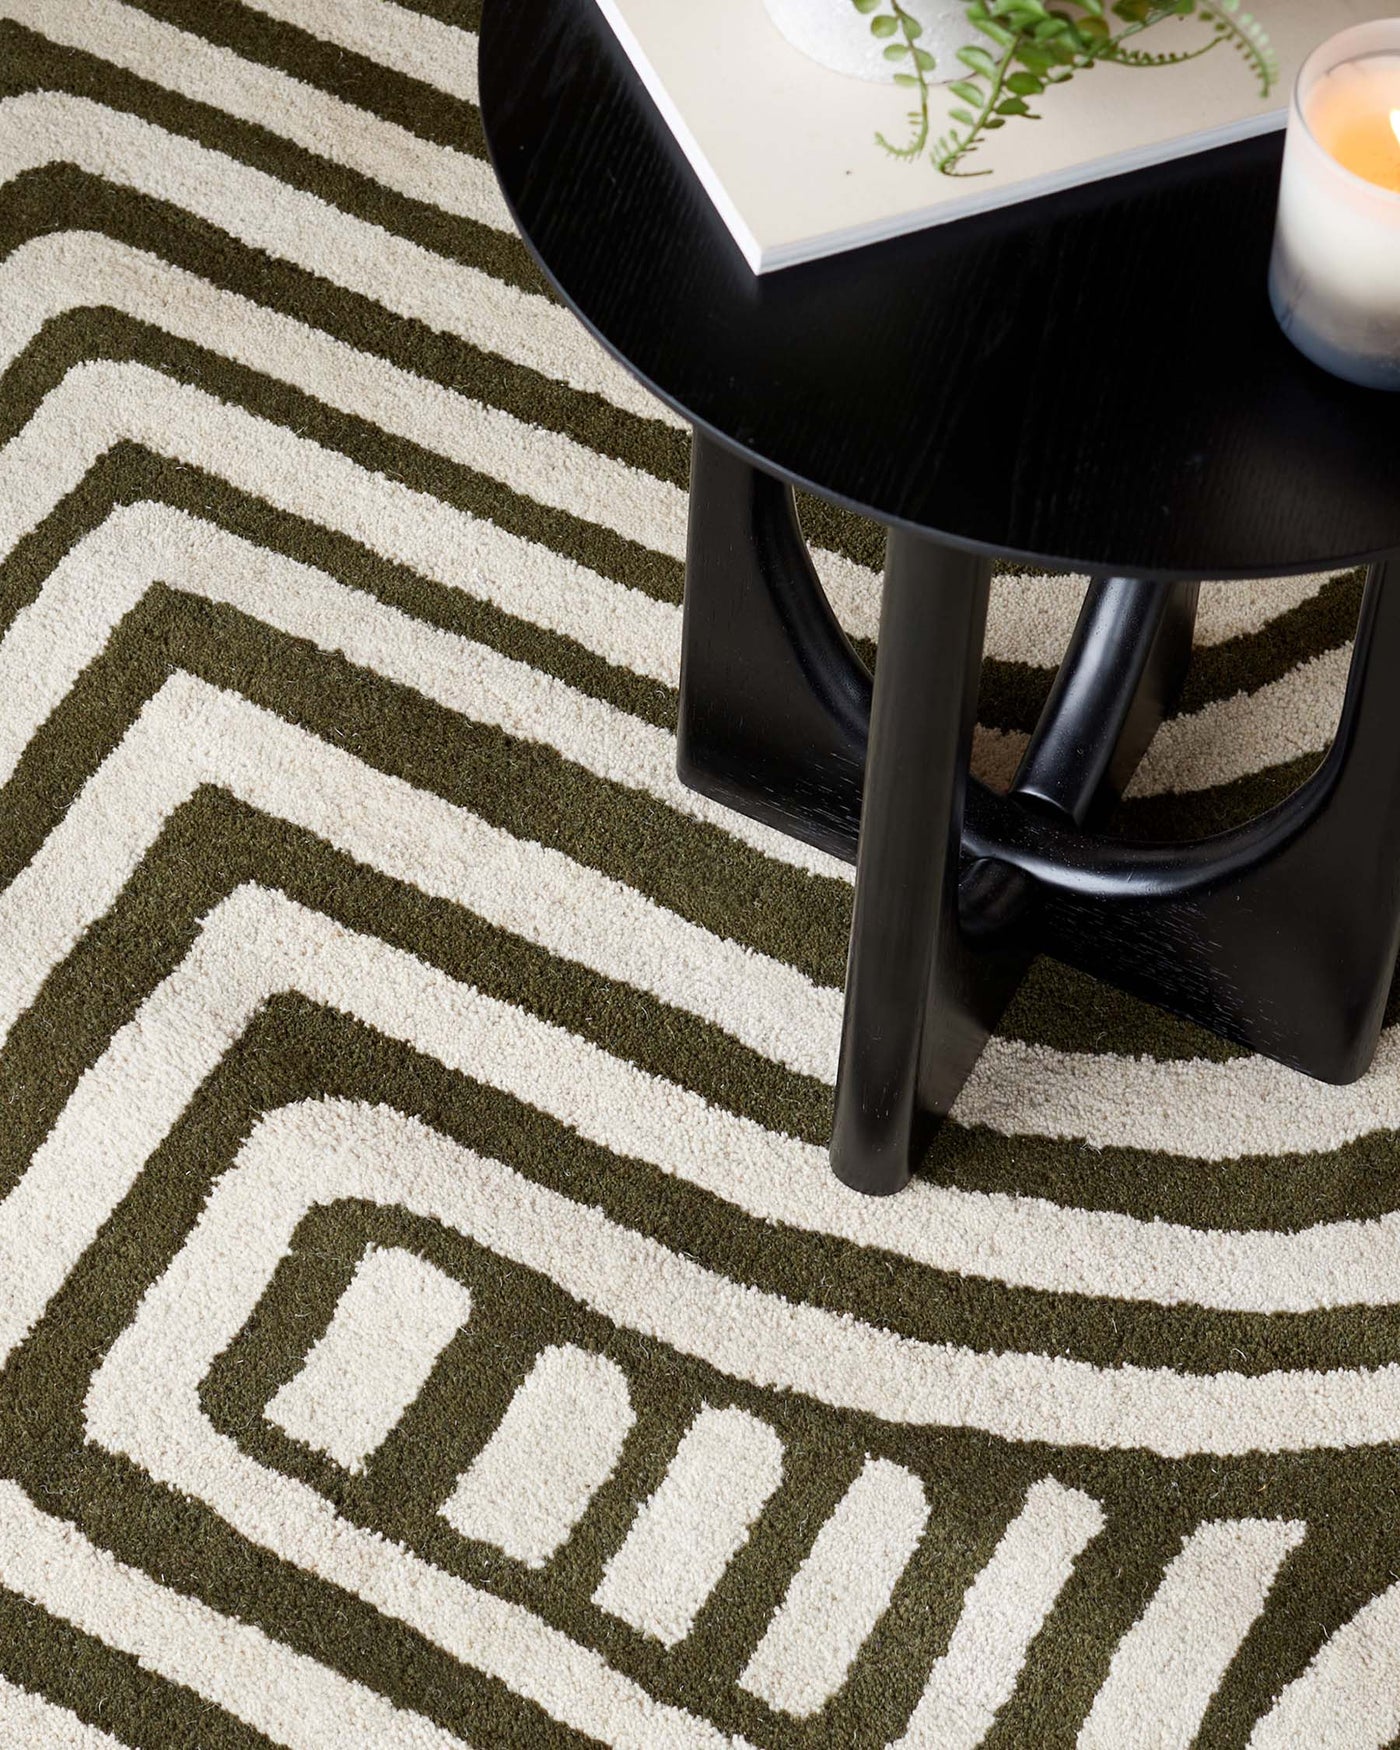 Modern round black coffee table with a unique three-legged base, featuring a glossy finish and a sleek design, on a patterned rug with olive and cream geometric stripes.